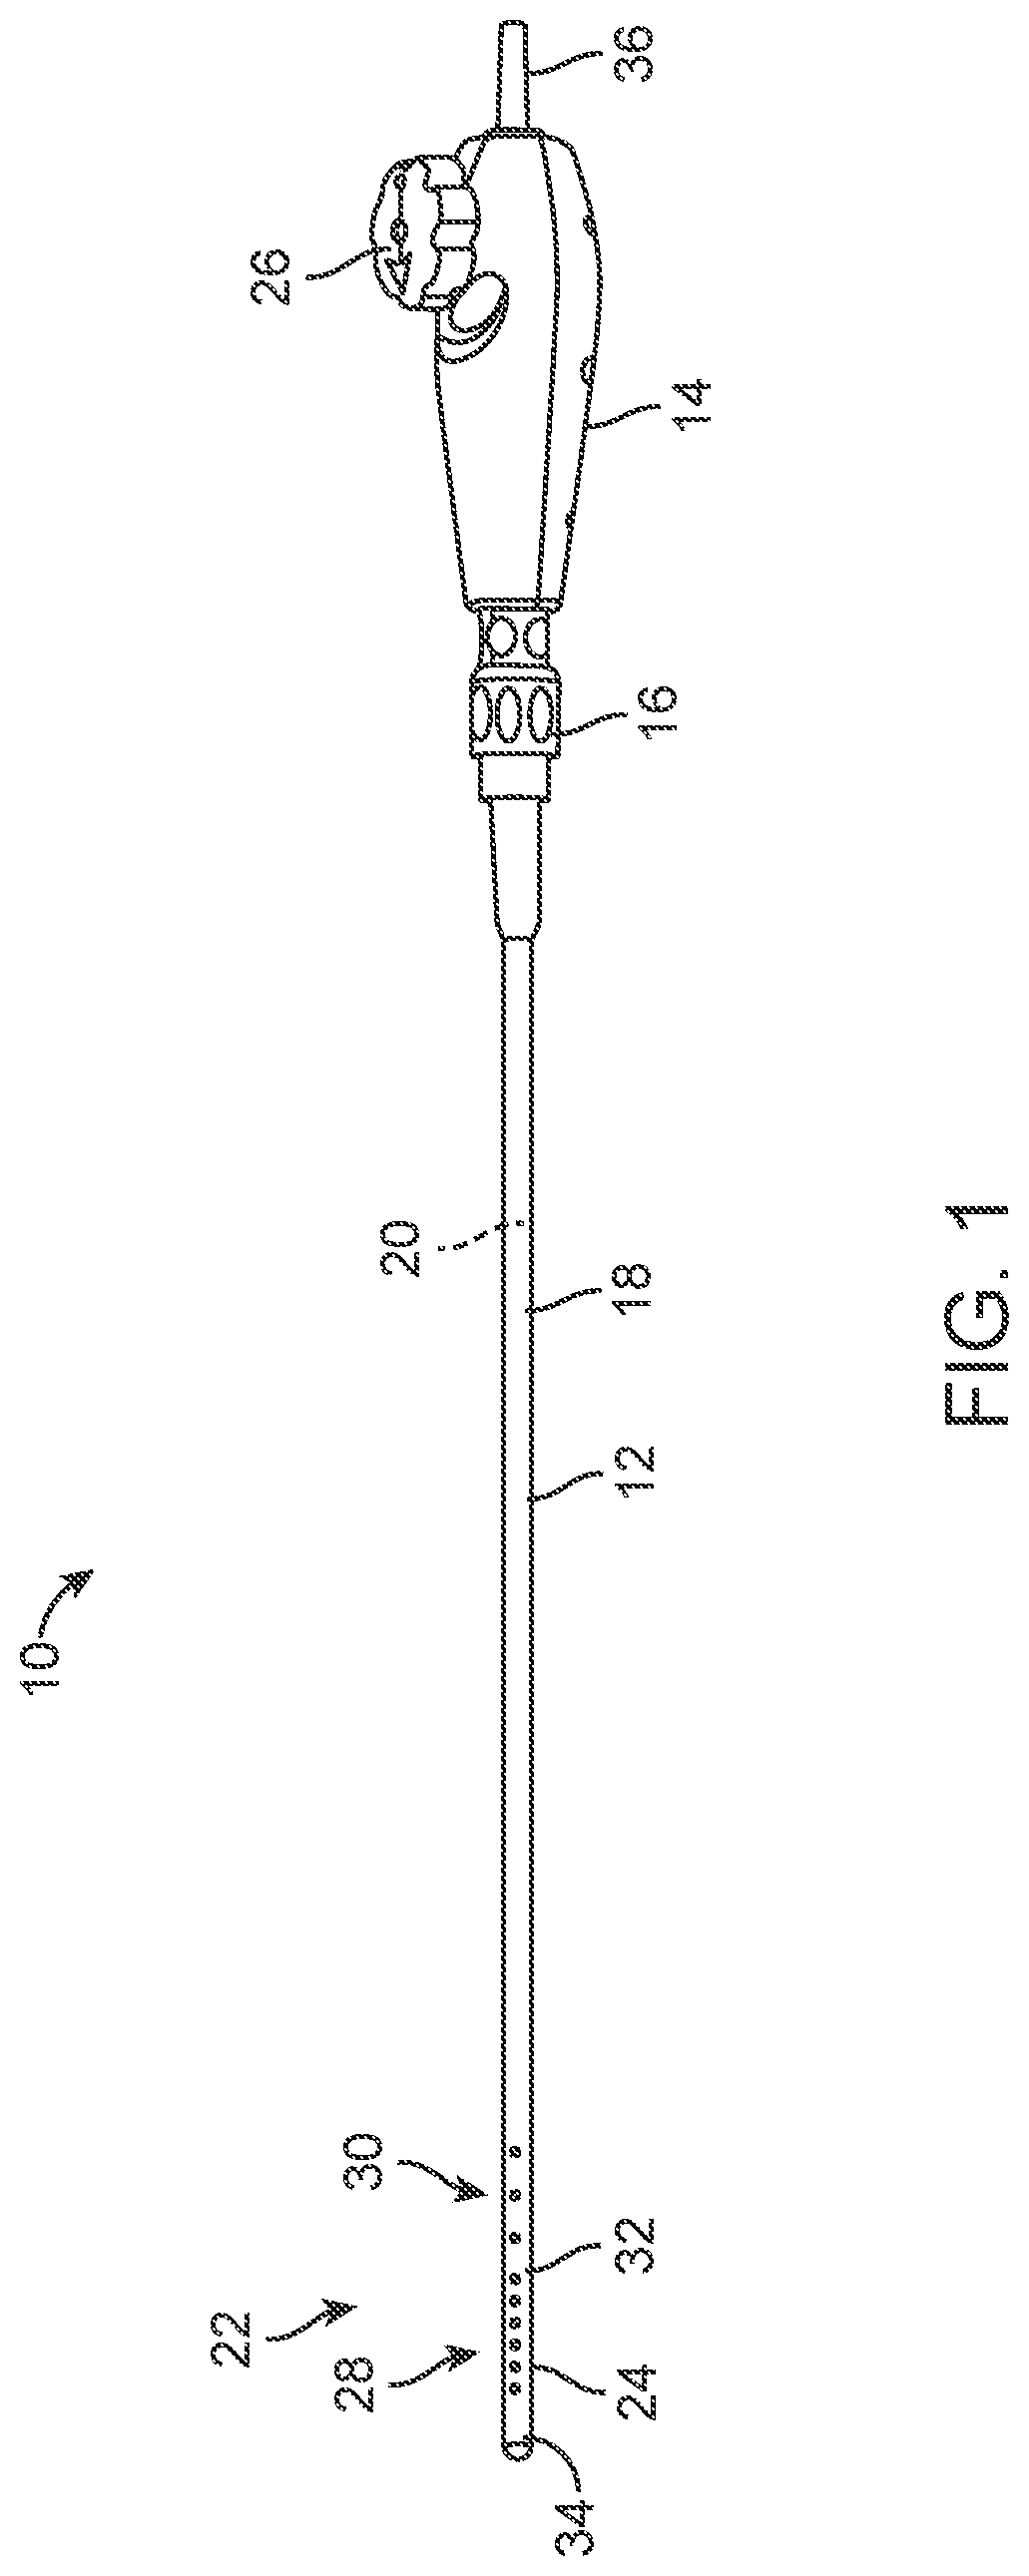 Electromagnetic sensing for use with ablation treatment